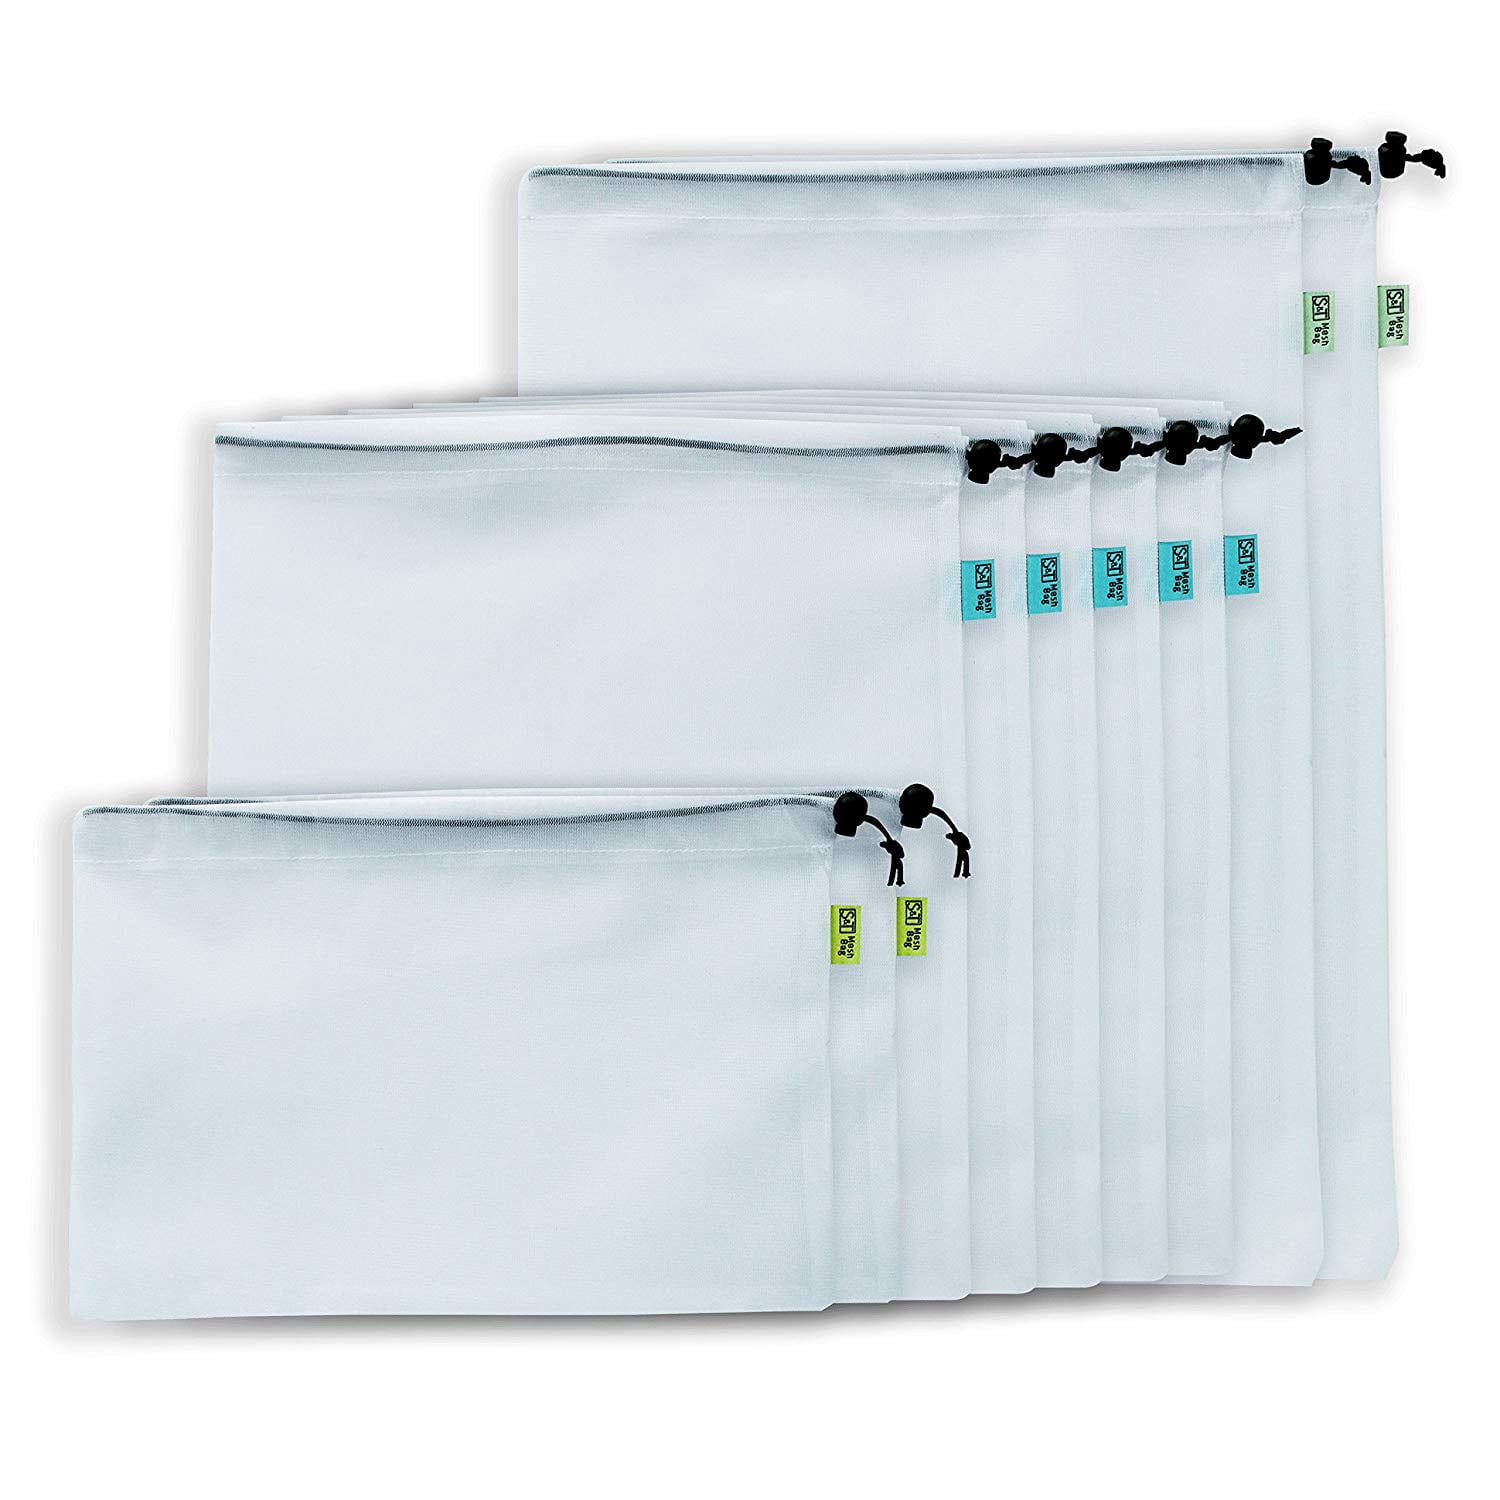 Reusable Double Stitched Mesh Bags - 9 pack - White - Walmart.com